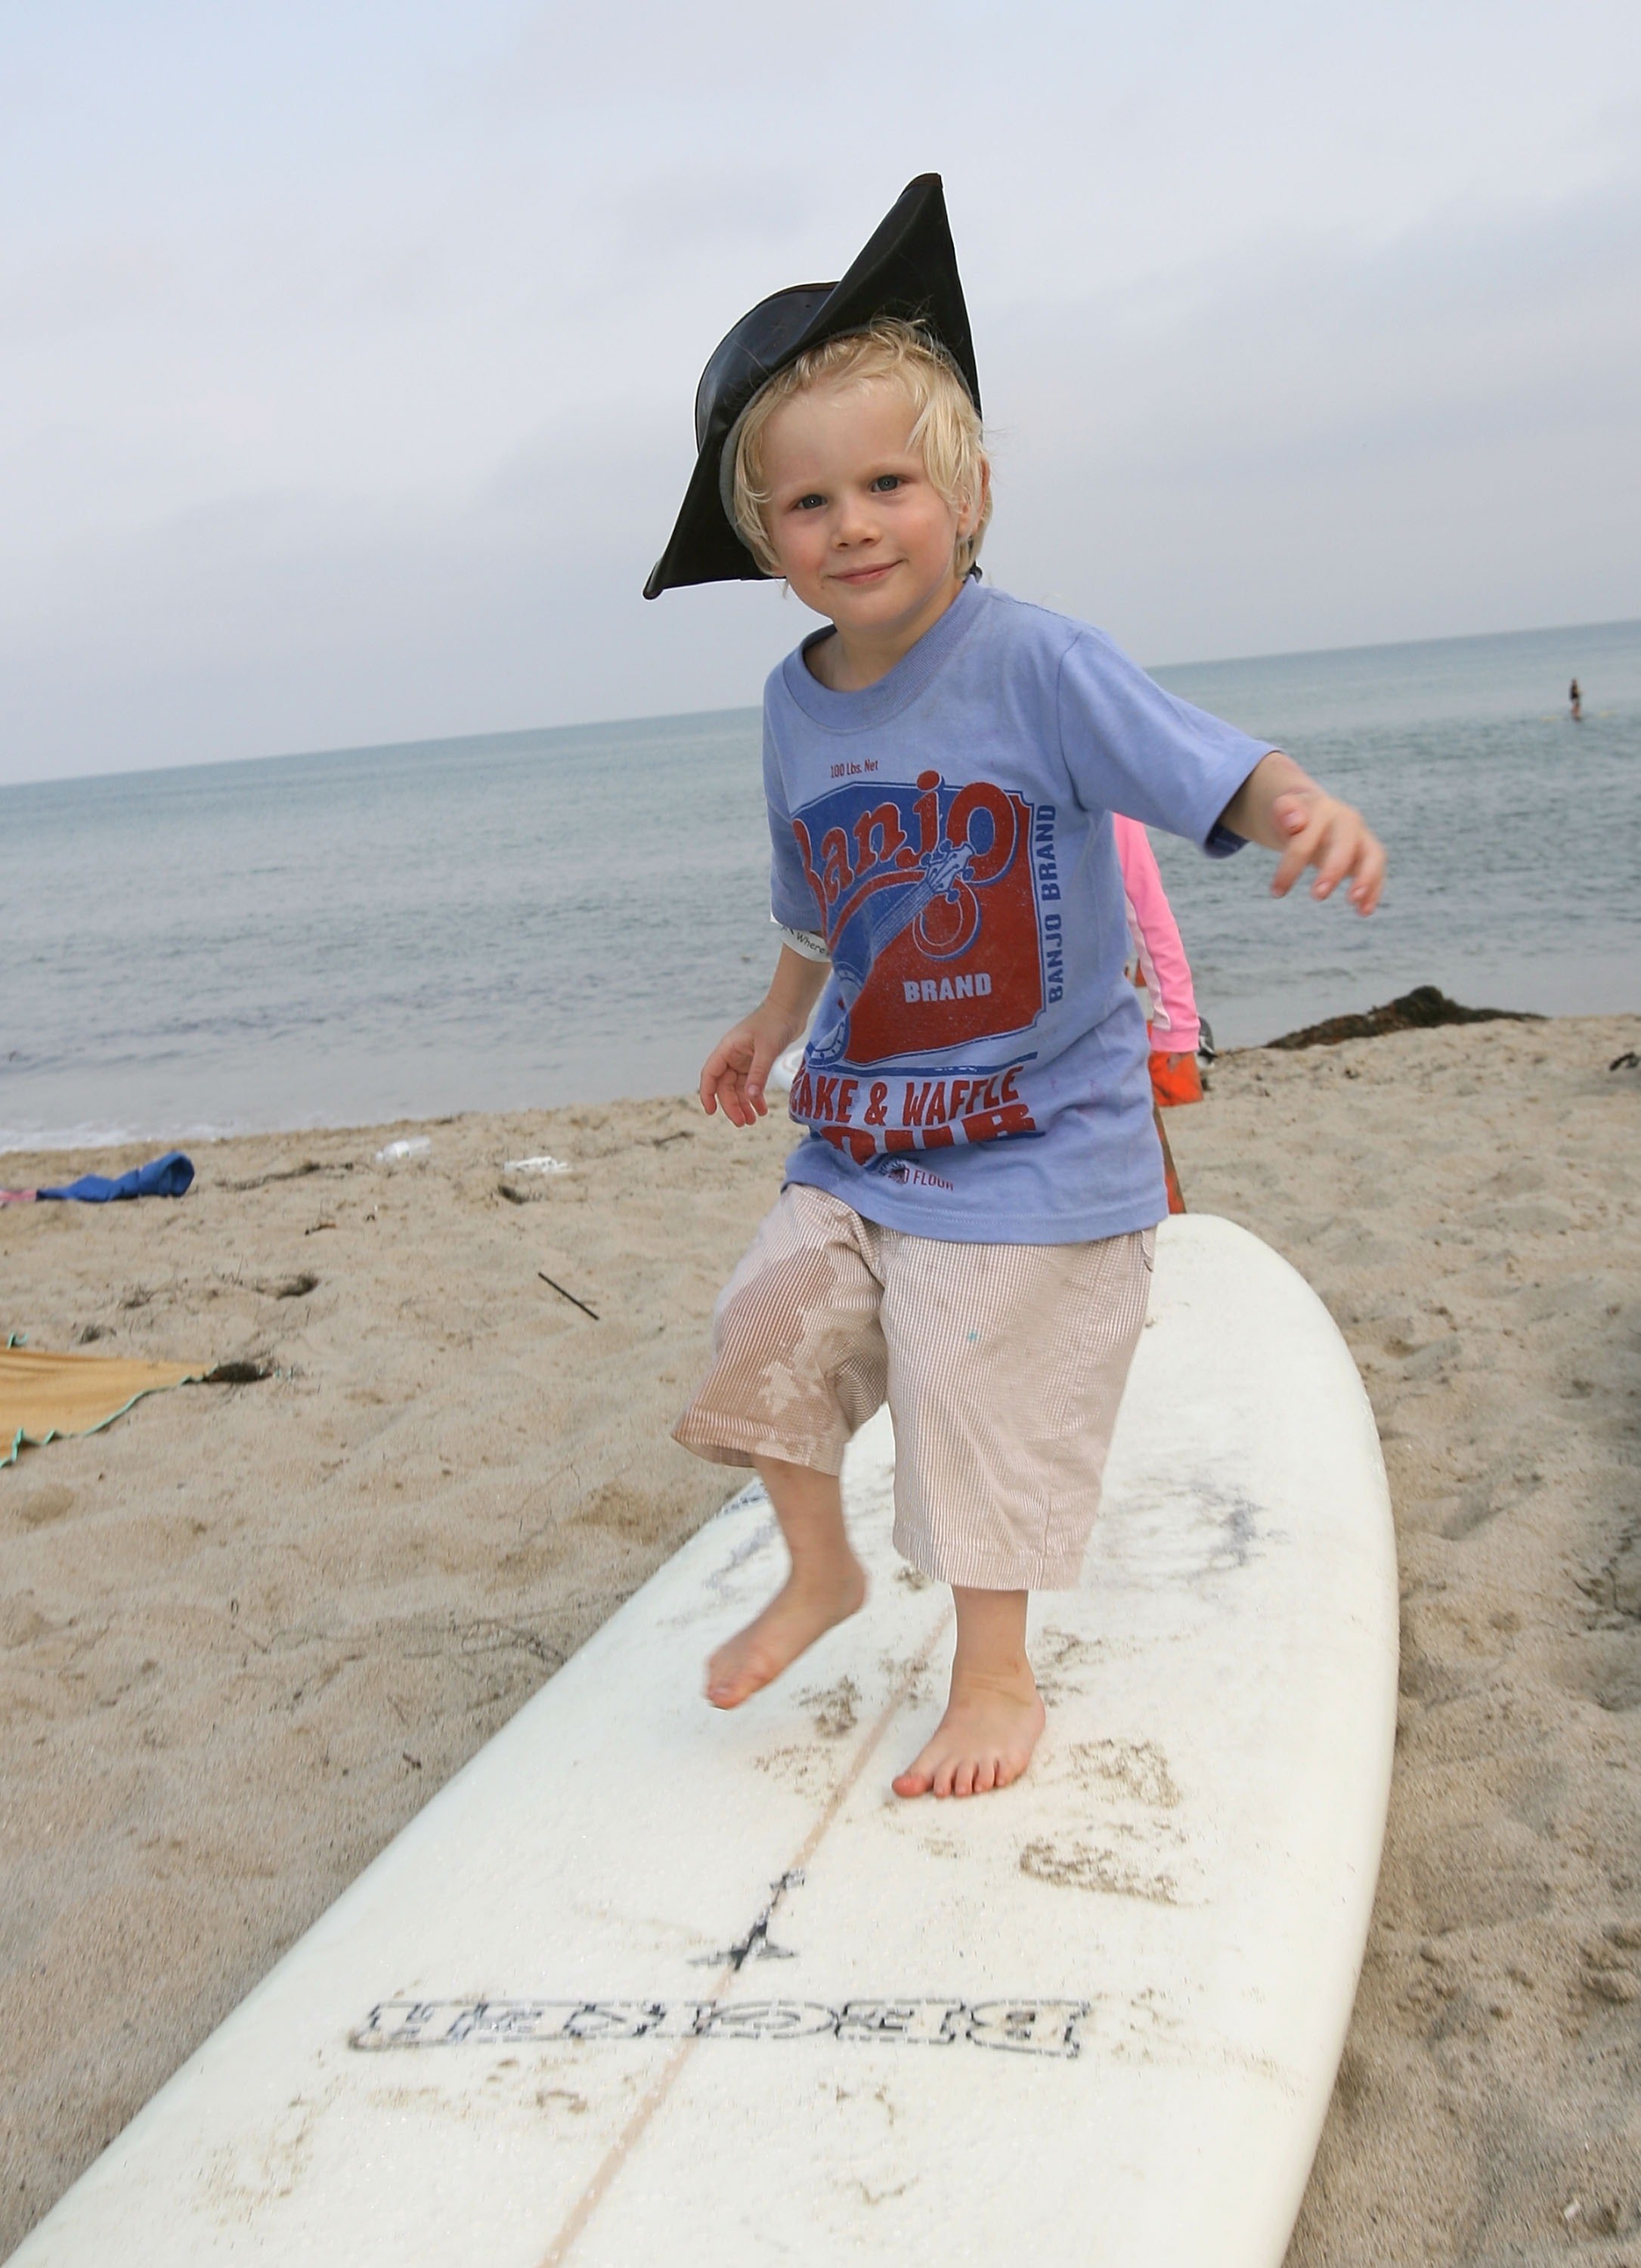 Banjo Taylor as a child standing on a surfboard in 2007